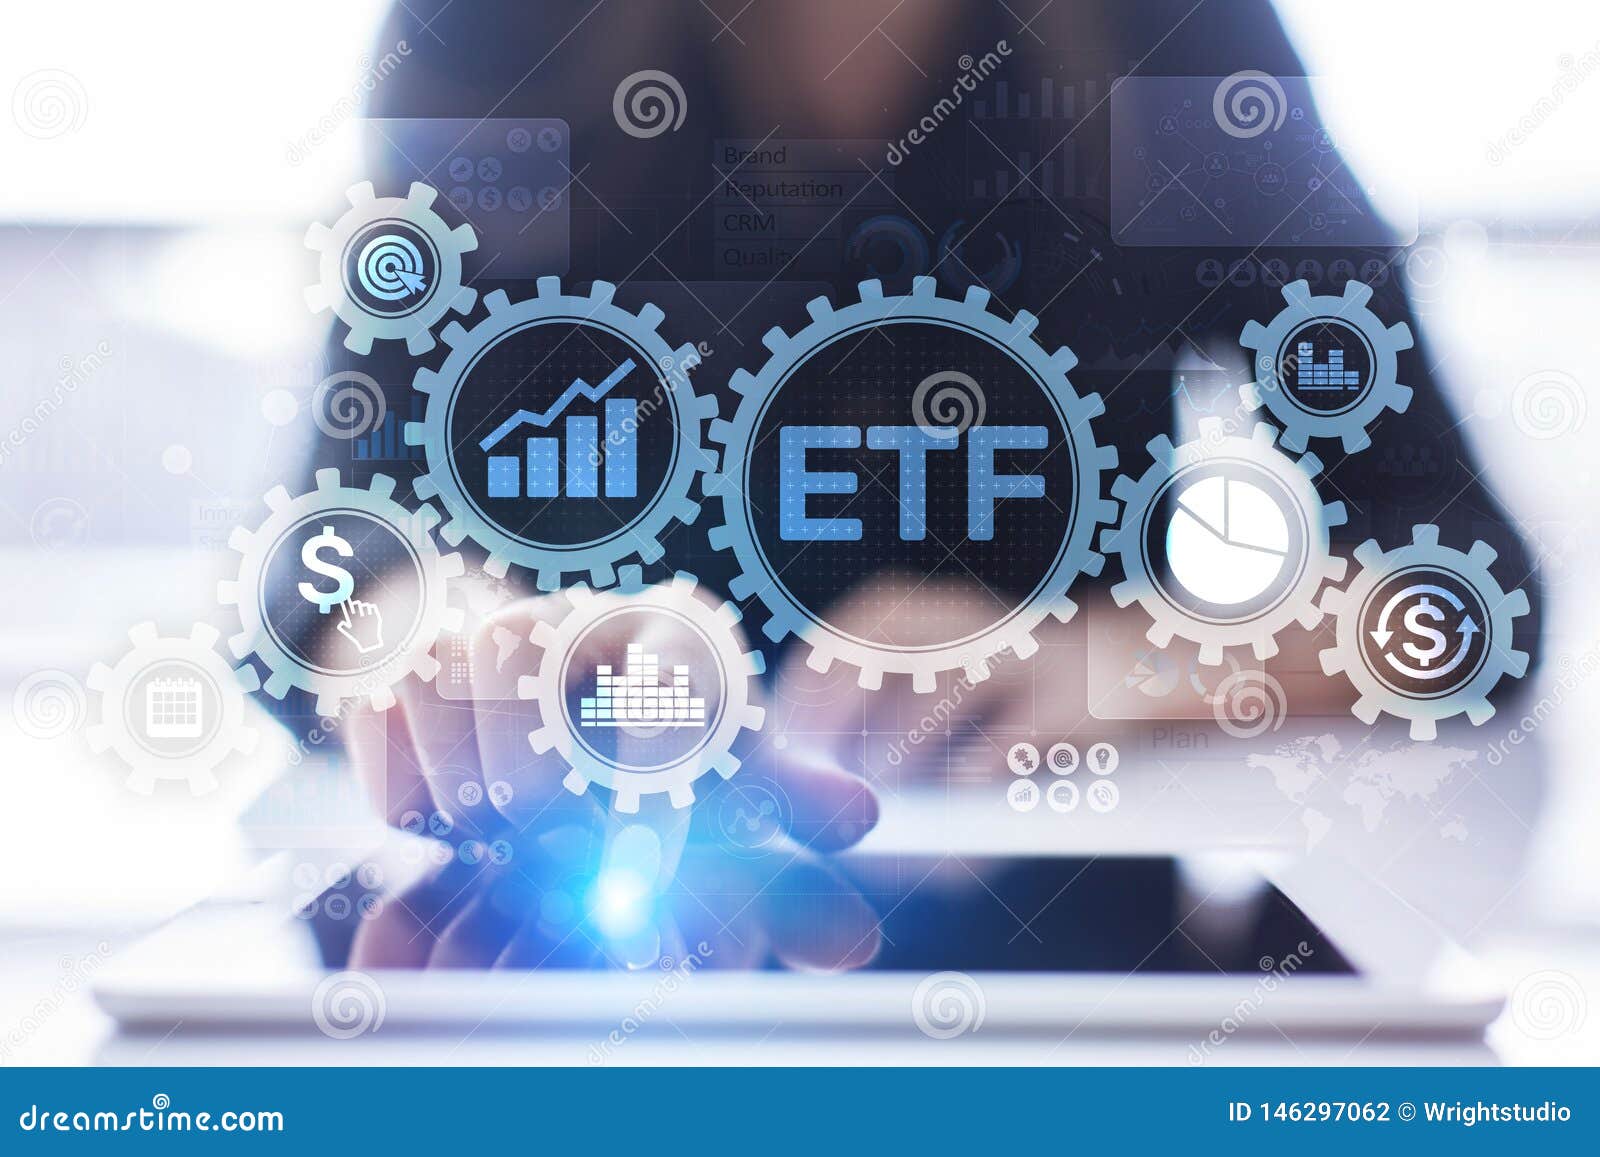 etf exchange traded fund trading investment business finance concept on virtual screen.